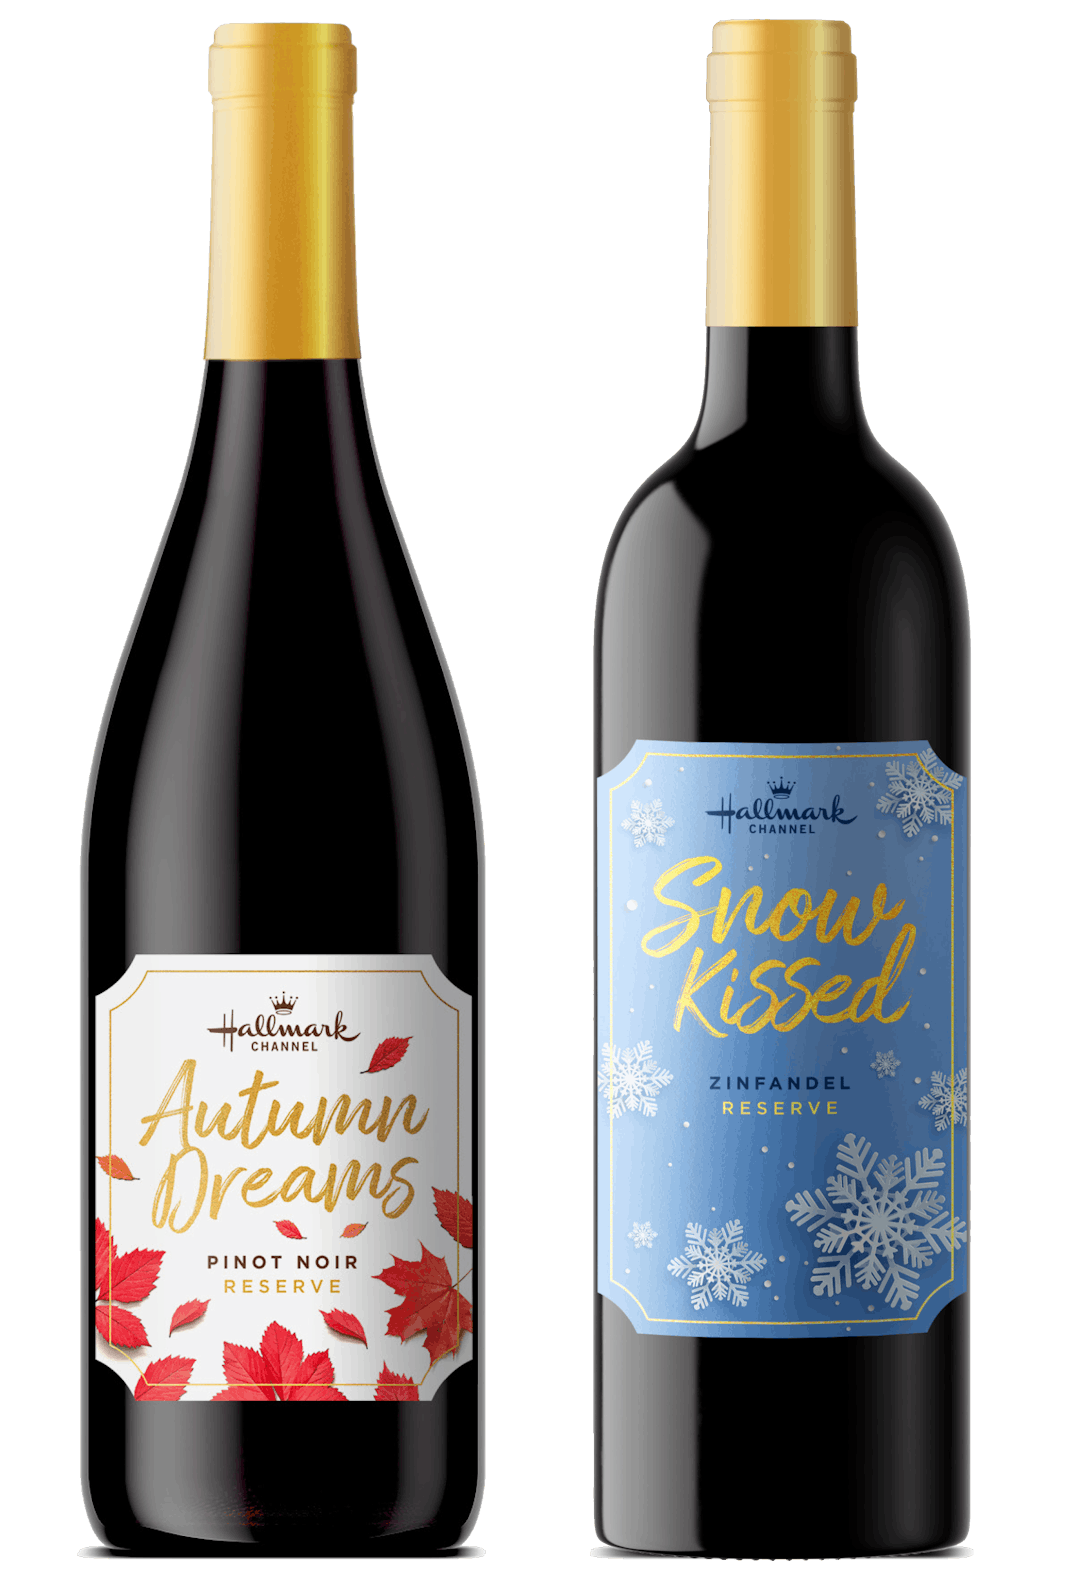 The Hallmark Channel Wine Club Is A Gift That Keeps On Giving